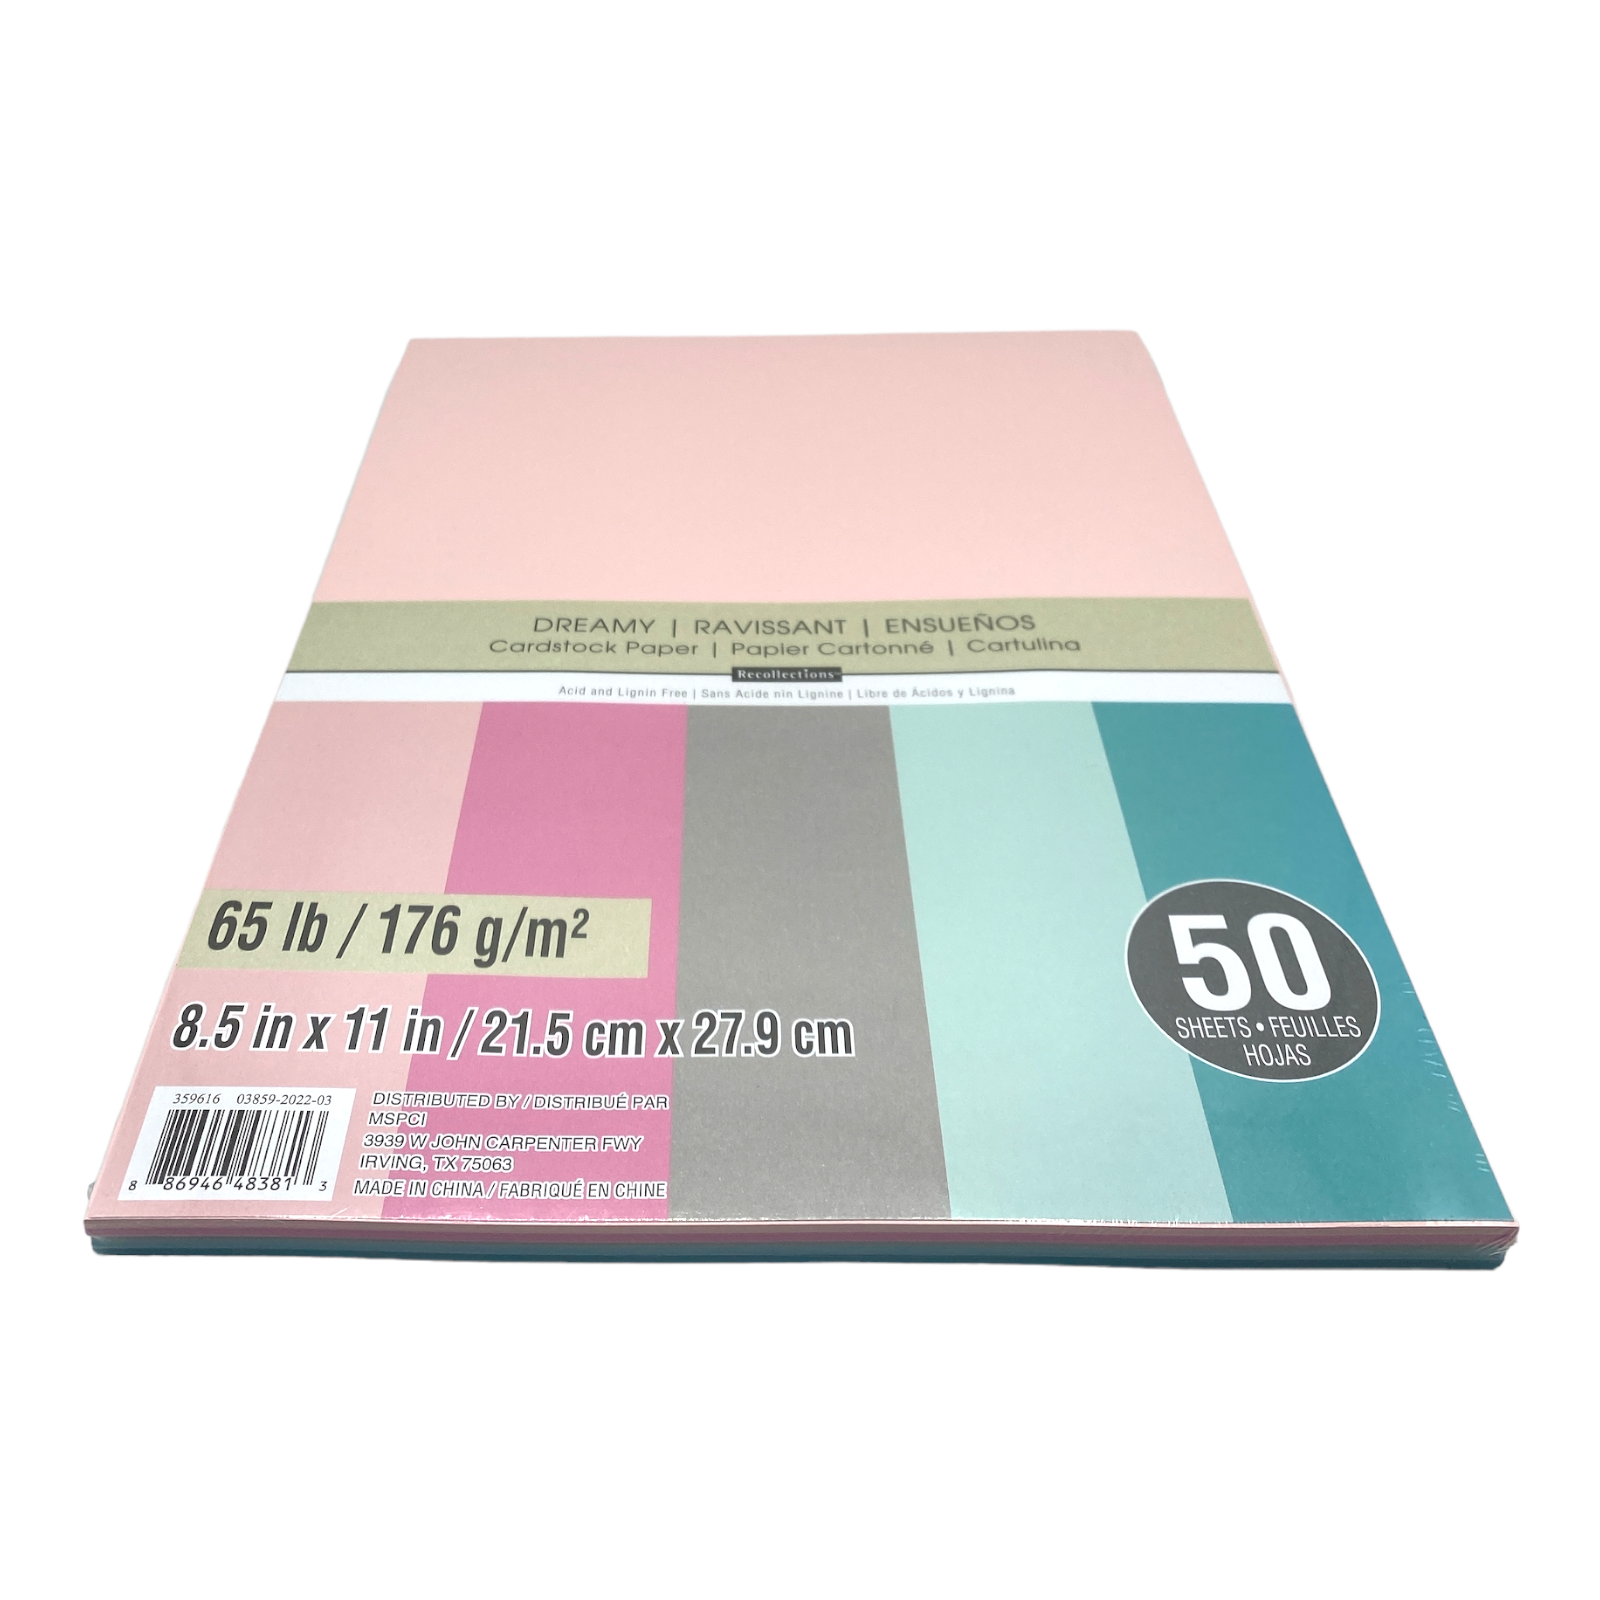 Recollections Cardstock Paper, 8 1/2 X 11 Pink Buttons - 50 Sheets